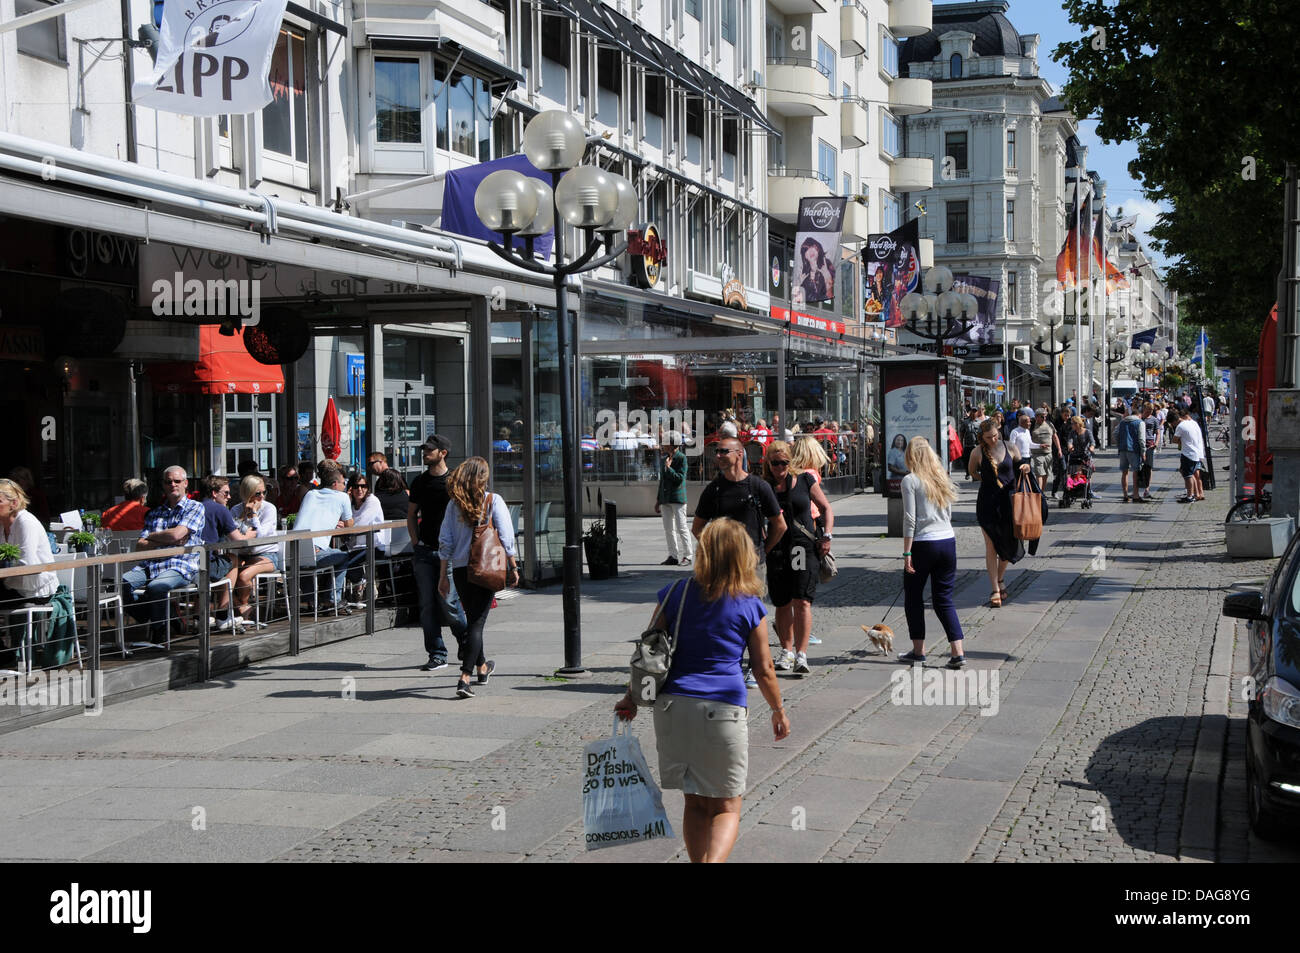 People with shops and sidewalk restaurants along the Avenyen in Gothenburg on West Coast of Sweden Stock Photo